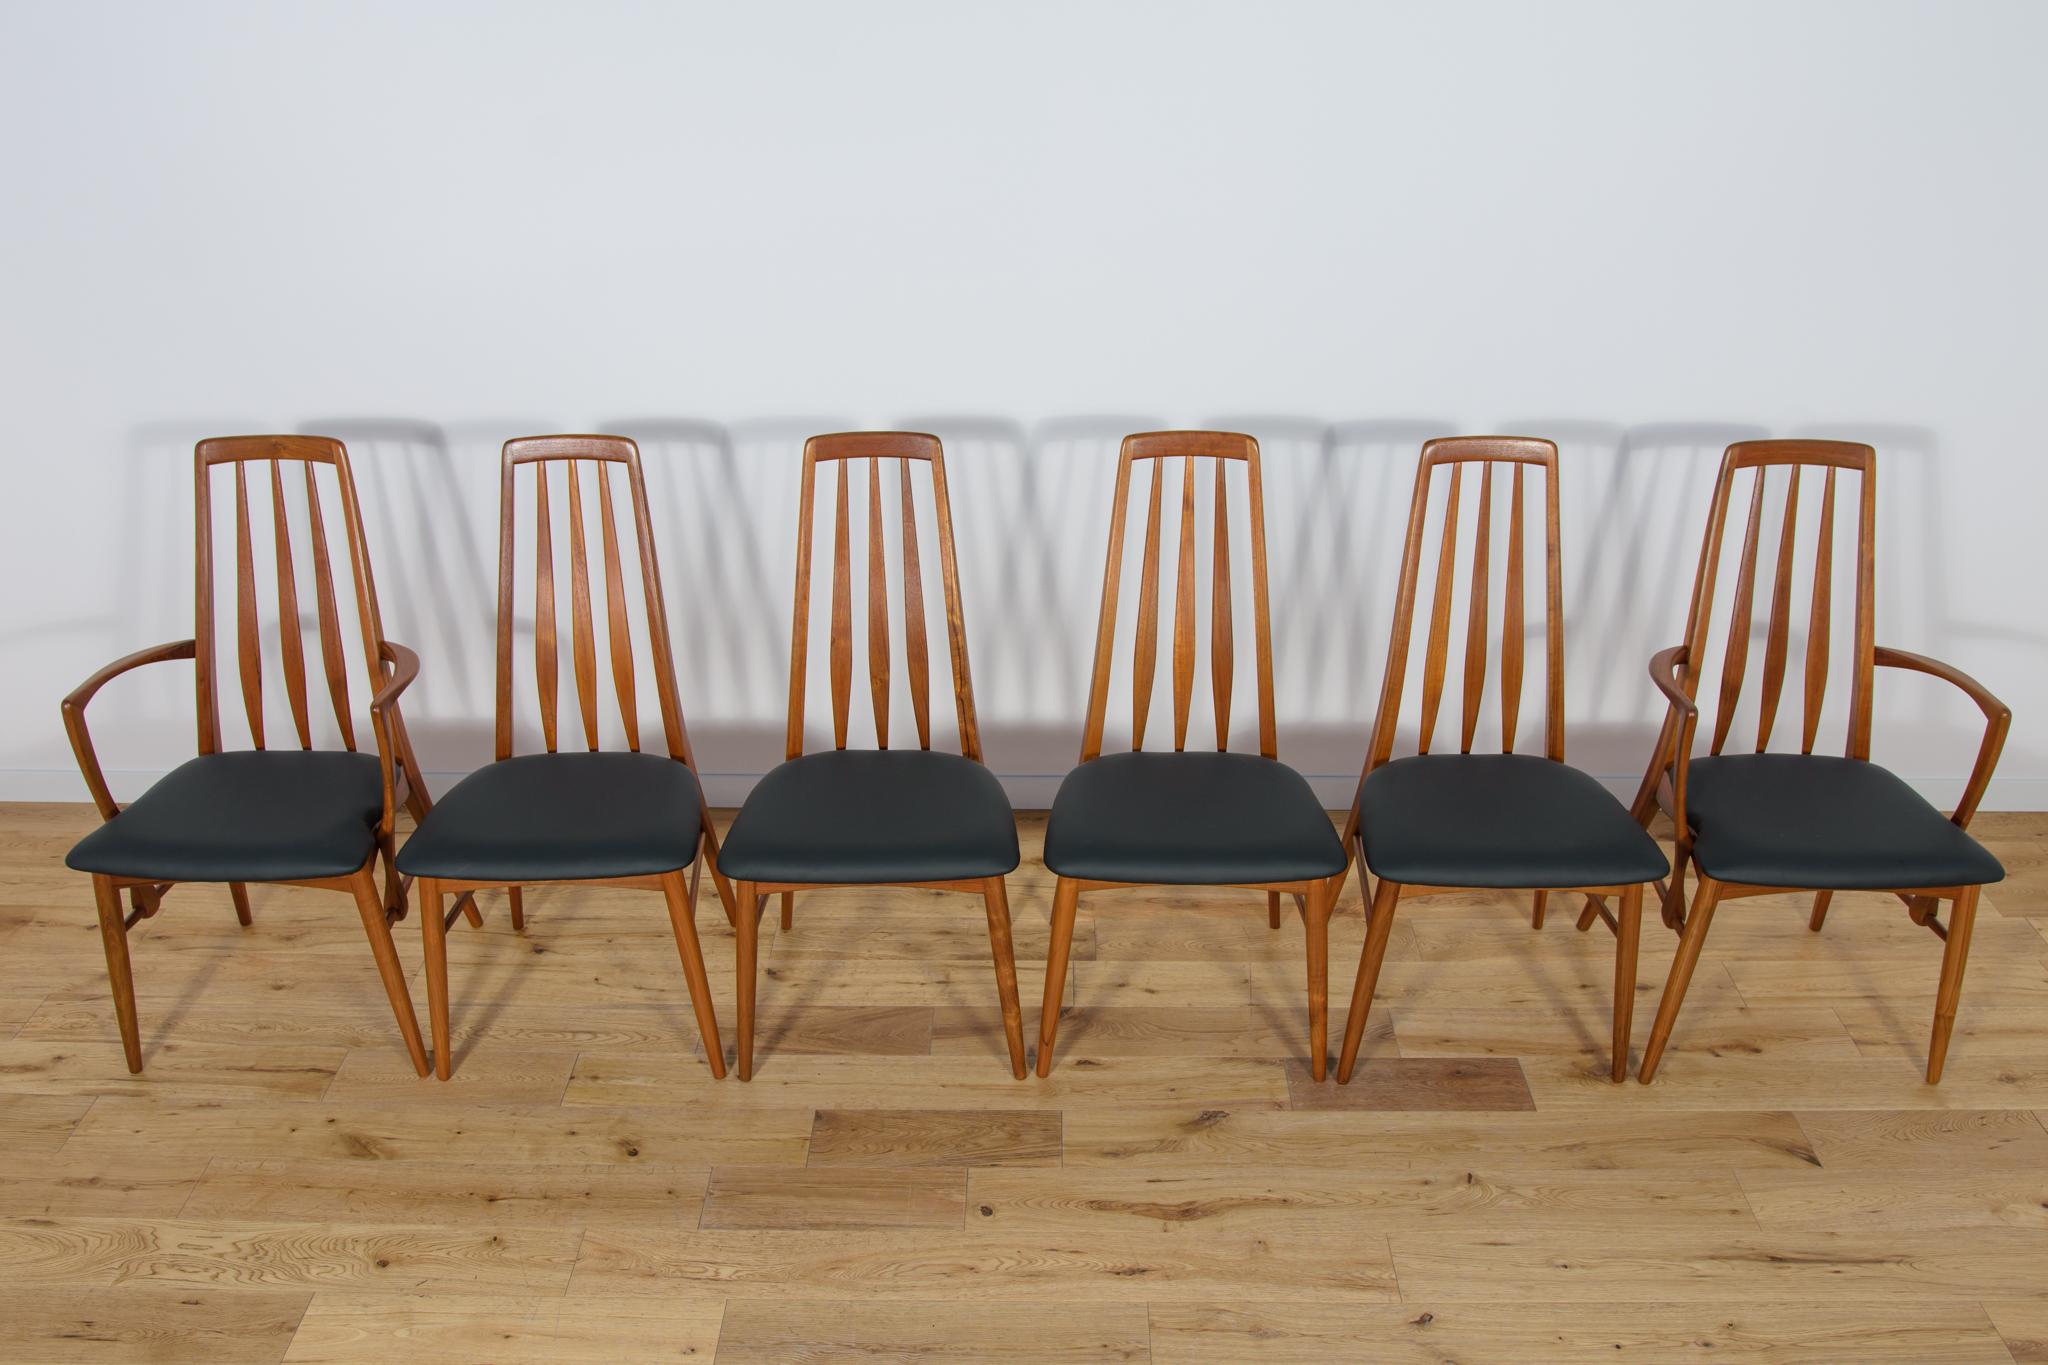 This set consists of four chairs and two armchairs. The Eva chair was designed by Niels Koefoed in 1964 and manufactured by Koefoeds Hornslet in Denmark. The frames are made of solid teak. Teak elements cleaned from the old surface and finished with